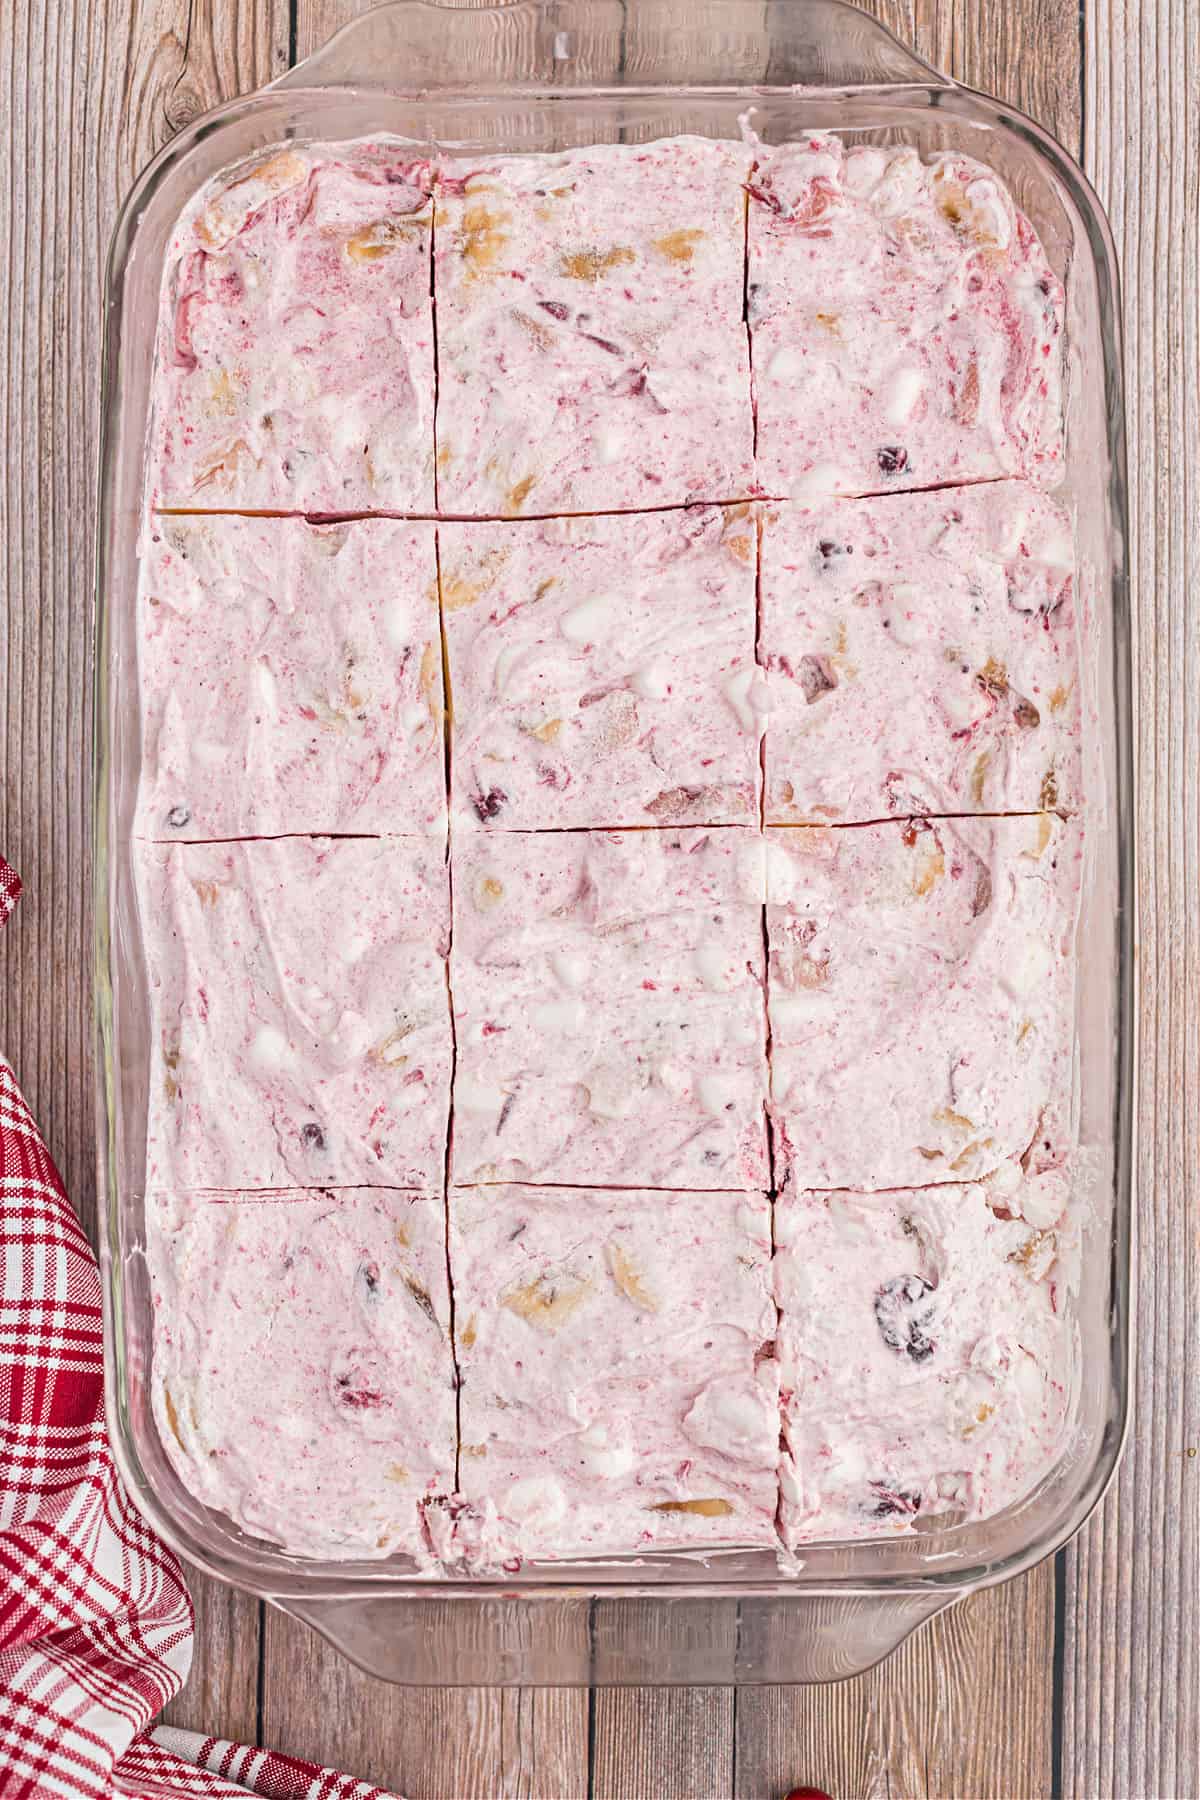 Glass 13x9 baking dish with frozen cranberry salad cut into 12 large squares.